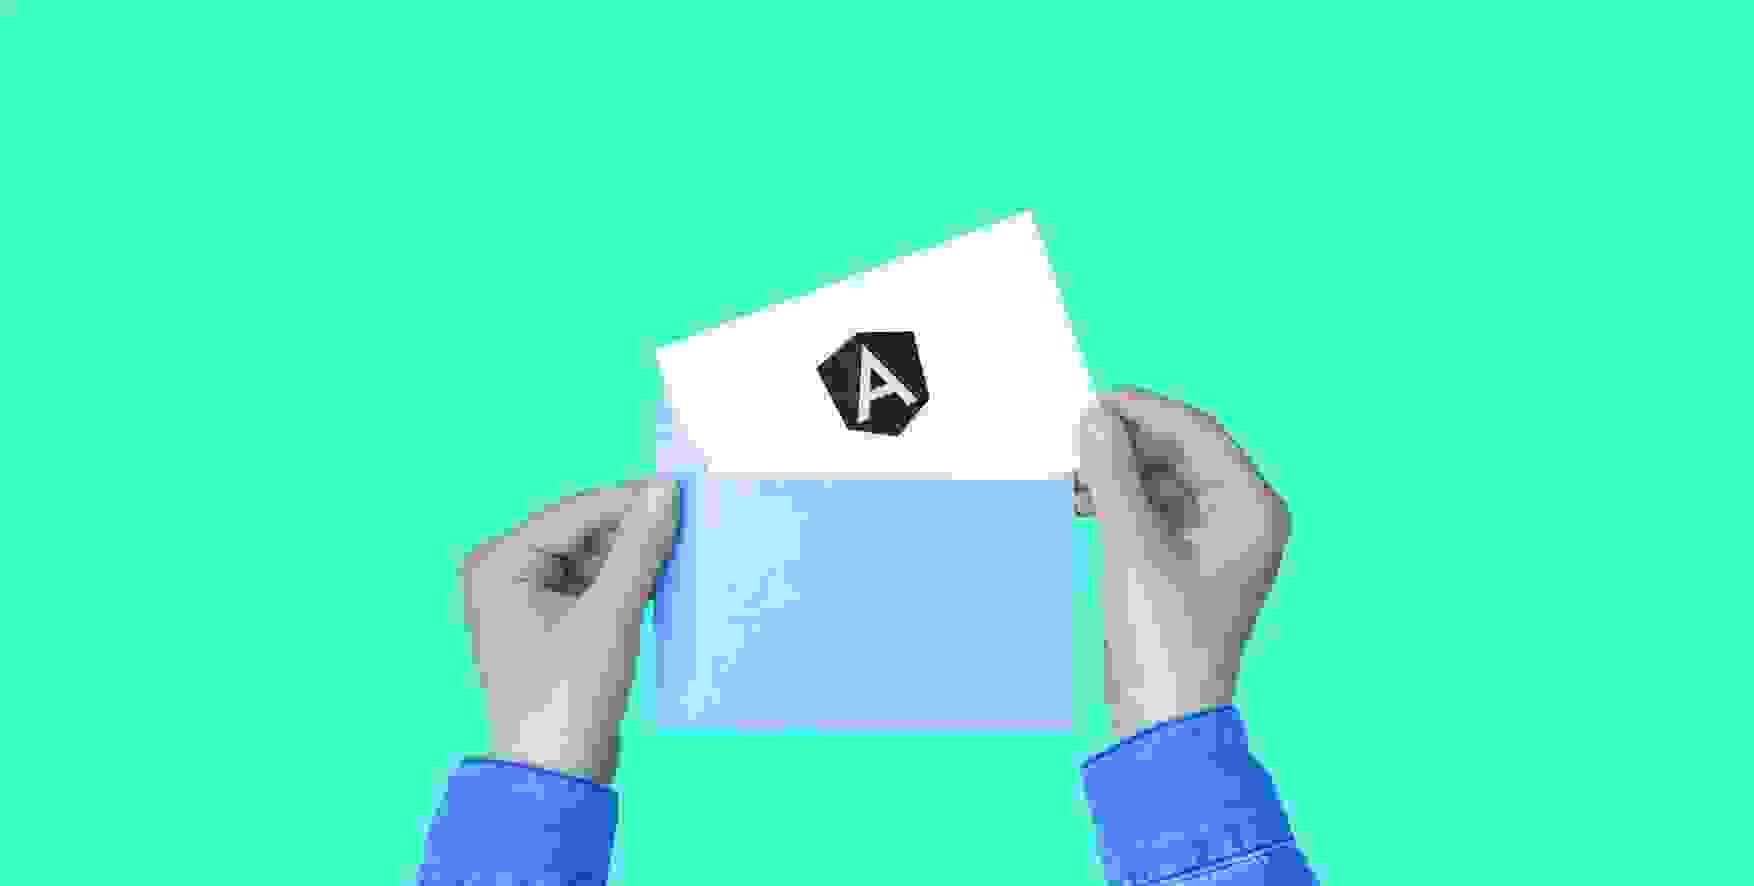 a sheet of paper with a symbol of Angular in an envelope